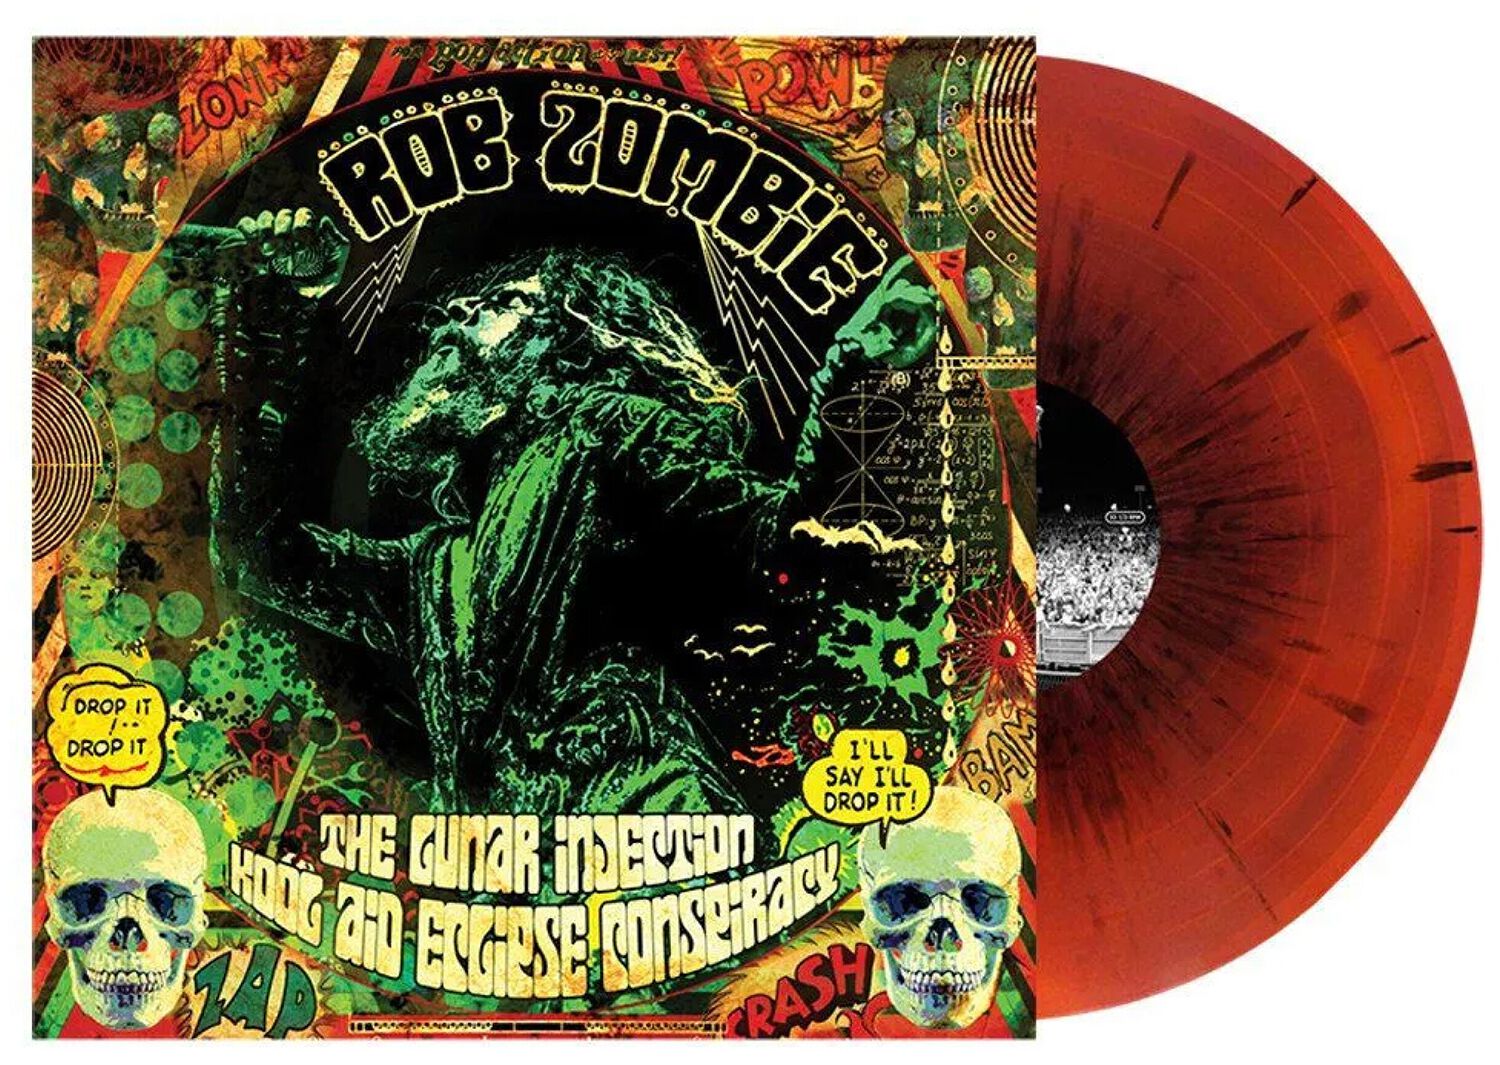 Image of Rob Zombie The lunar injection kool aid eclipse conspiracy LP splattered